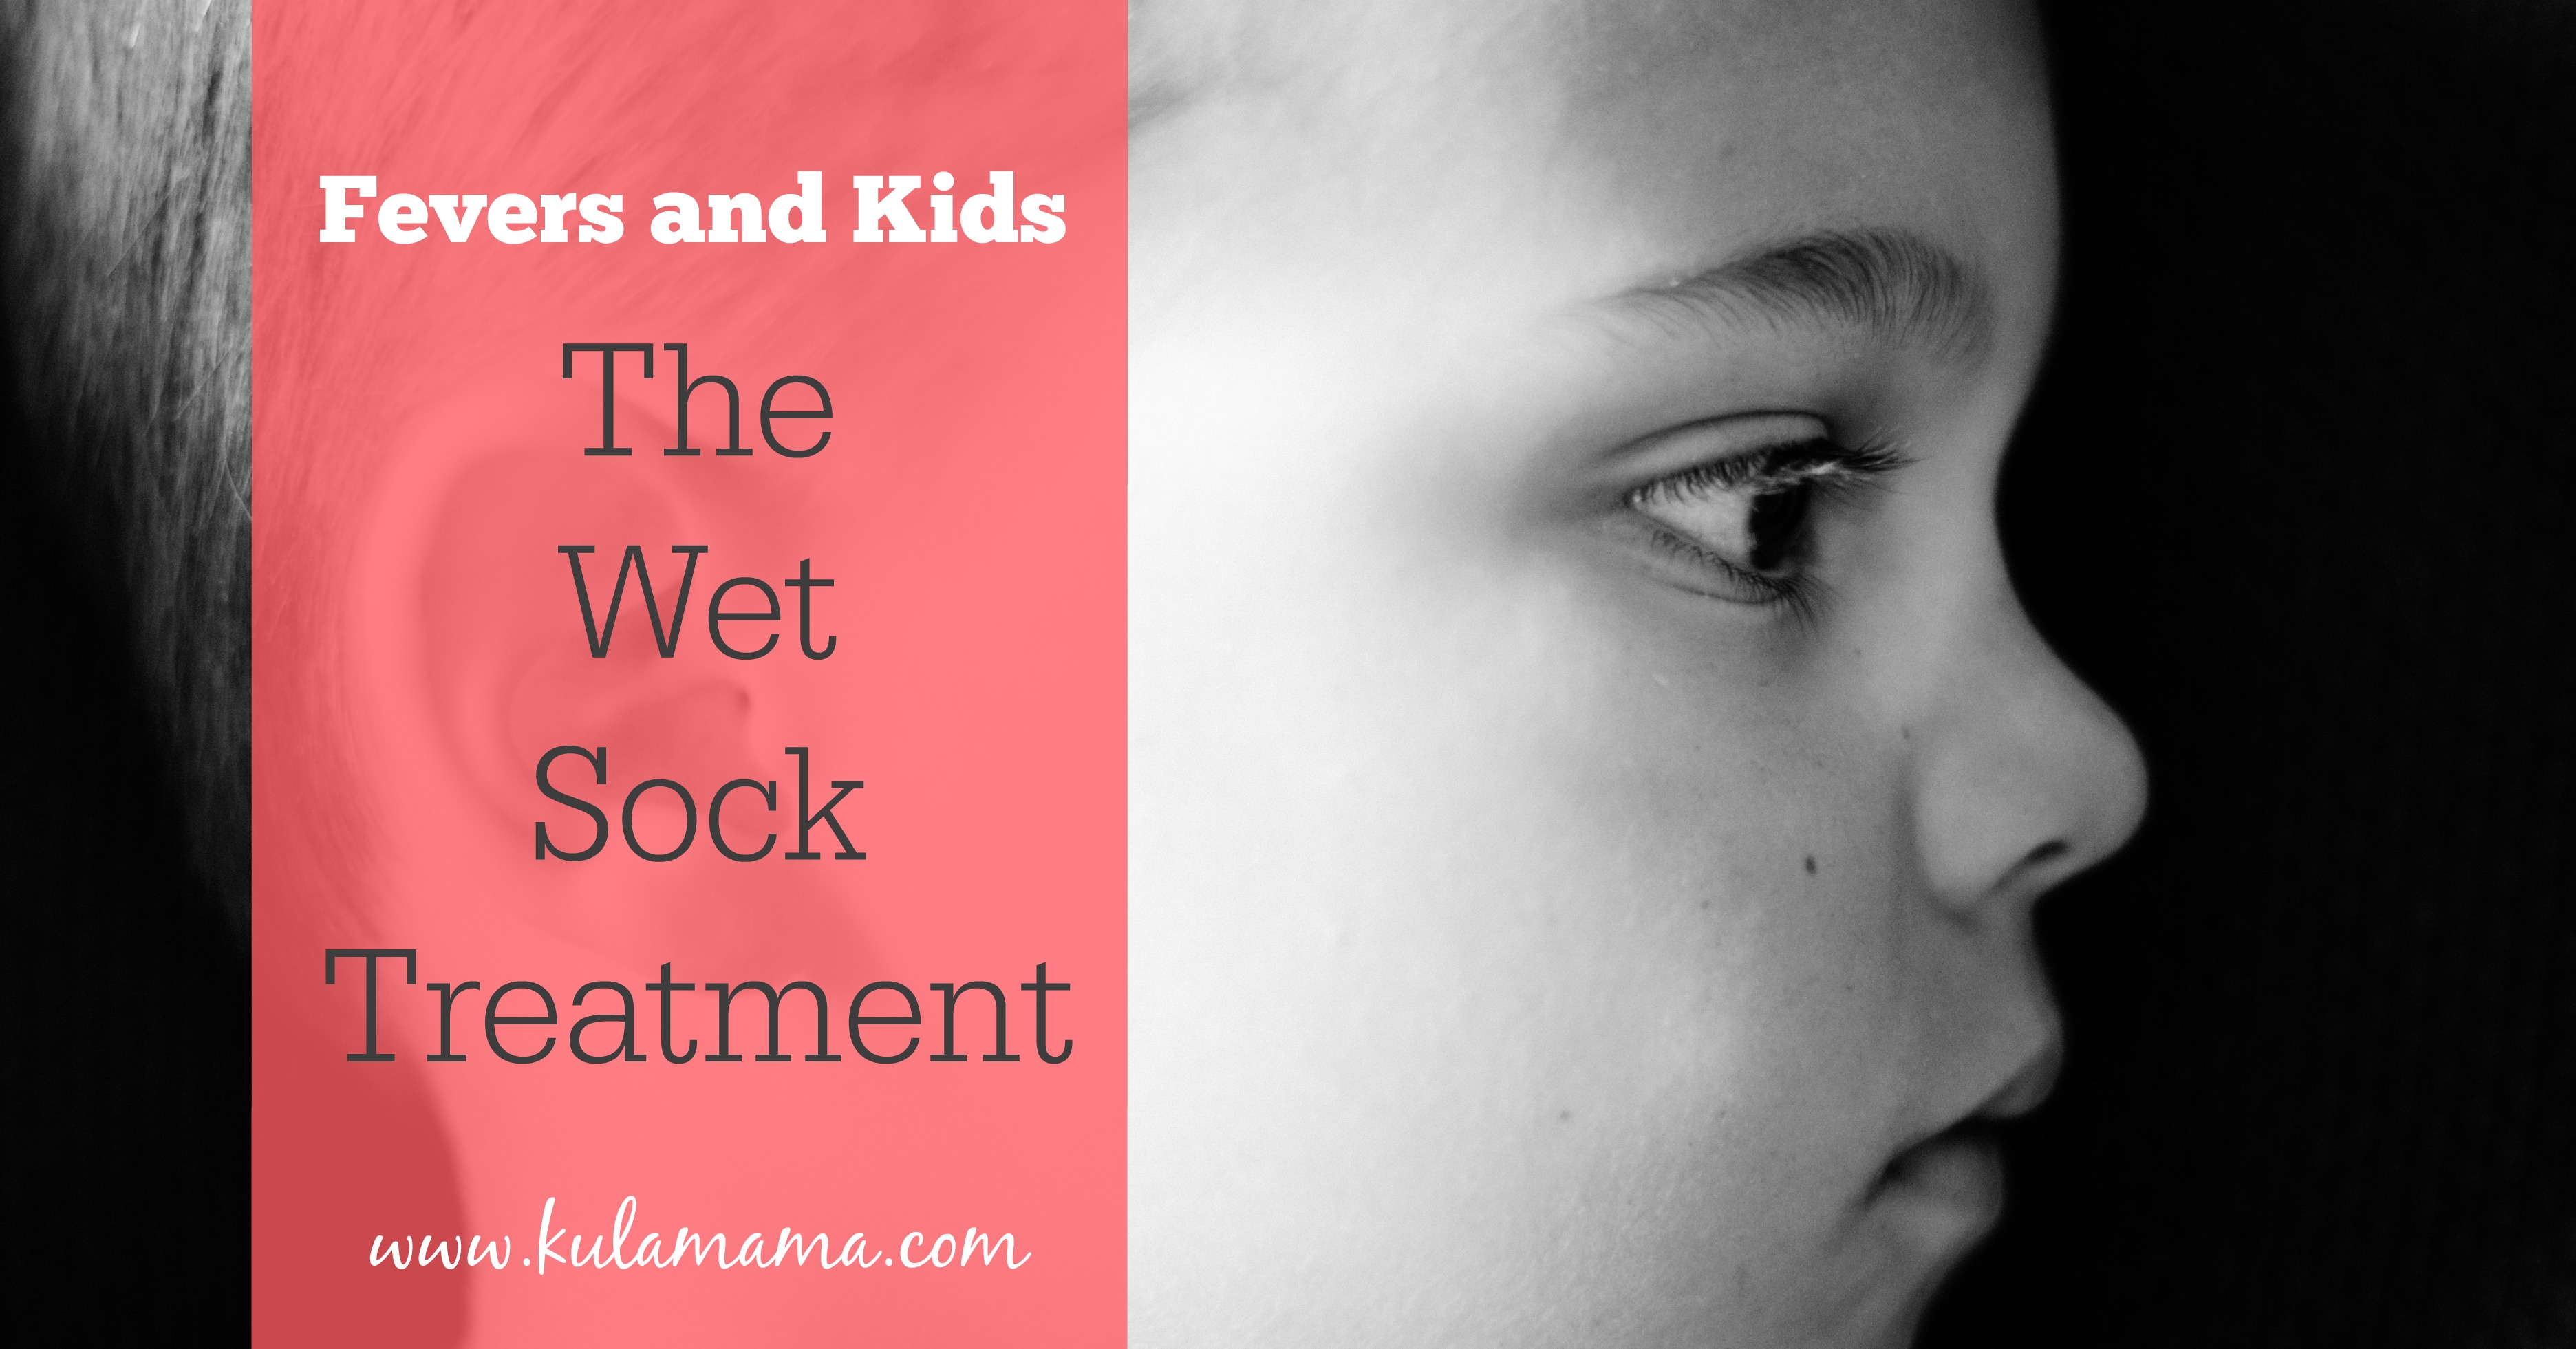 Fevers and Kids: The Wet Sock Treatment